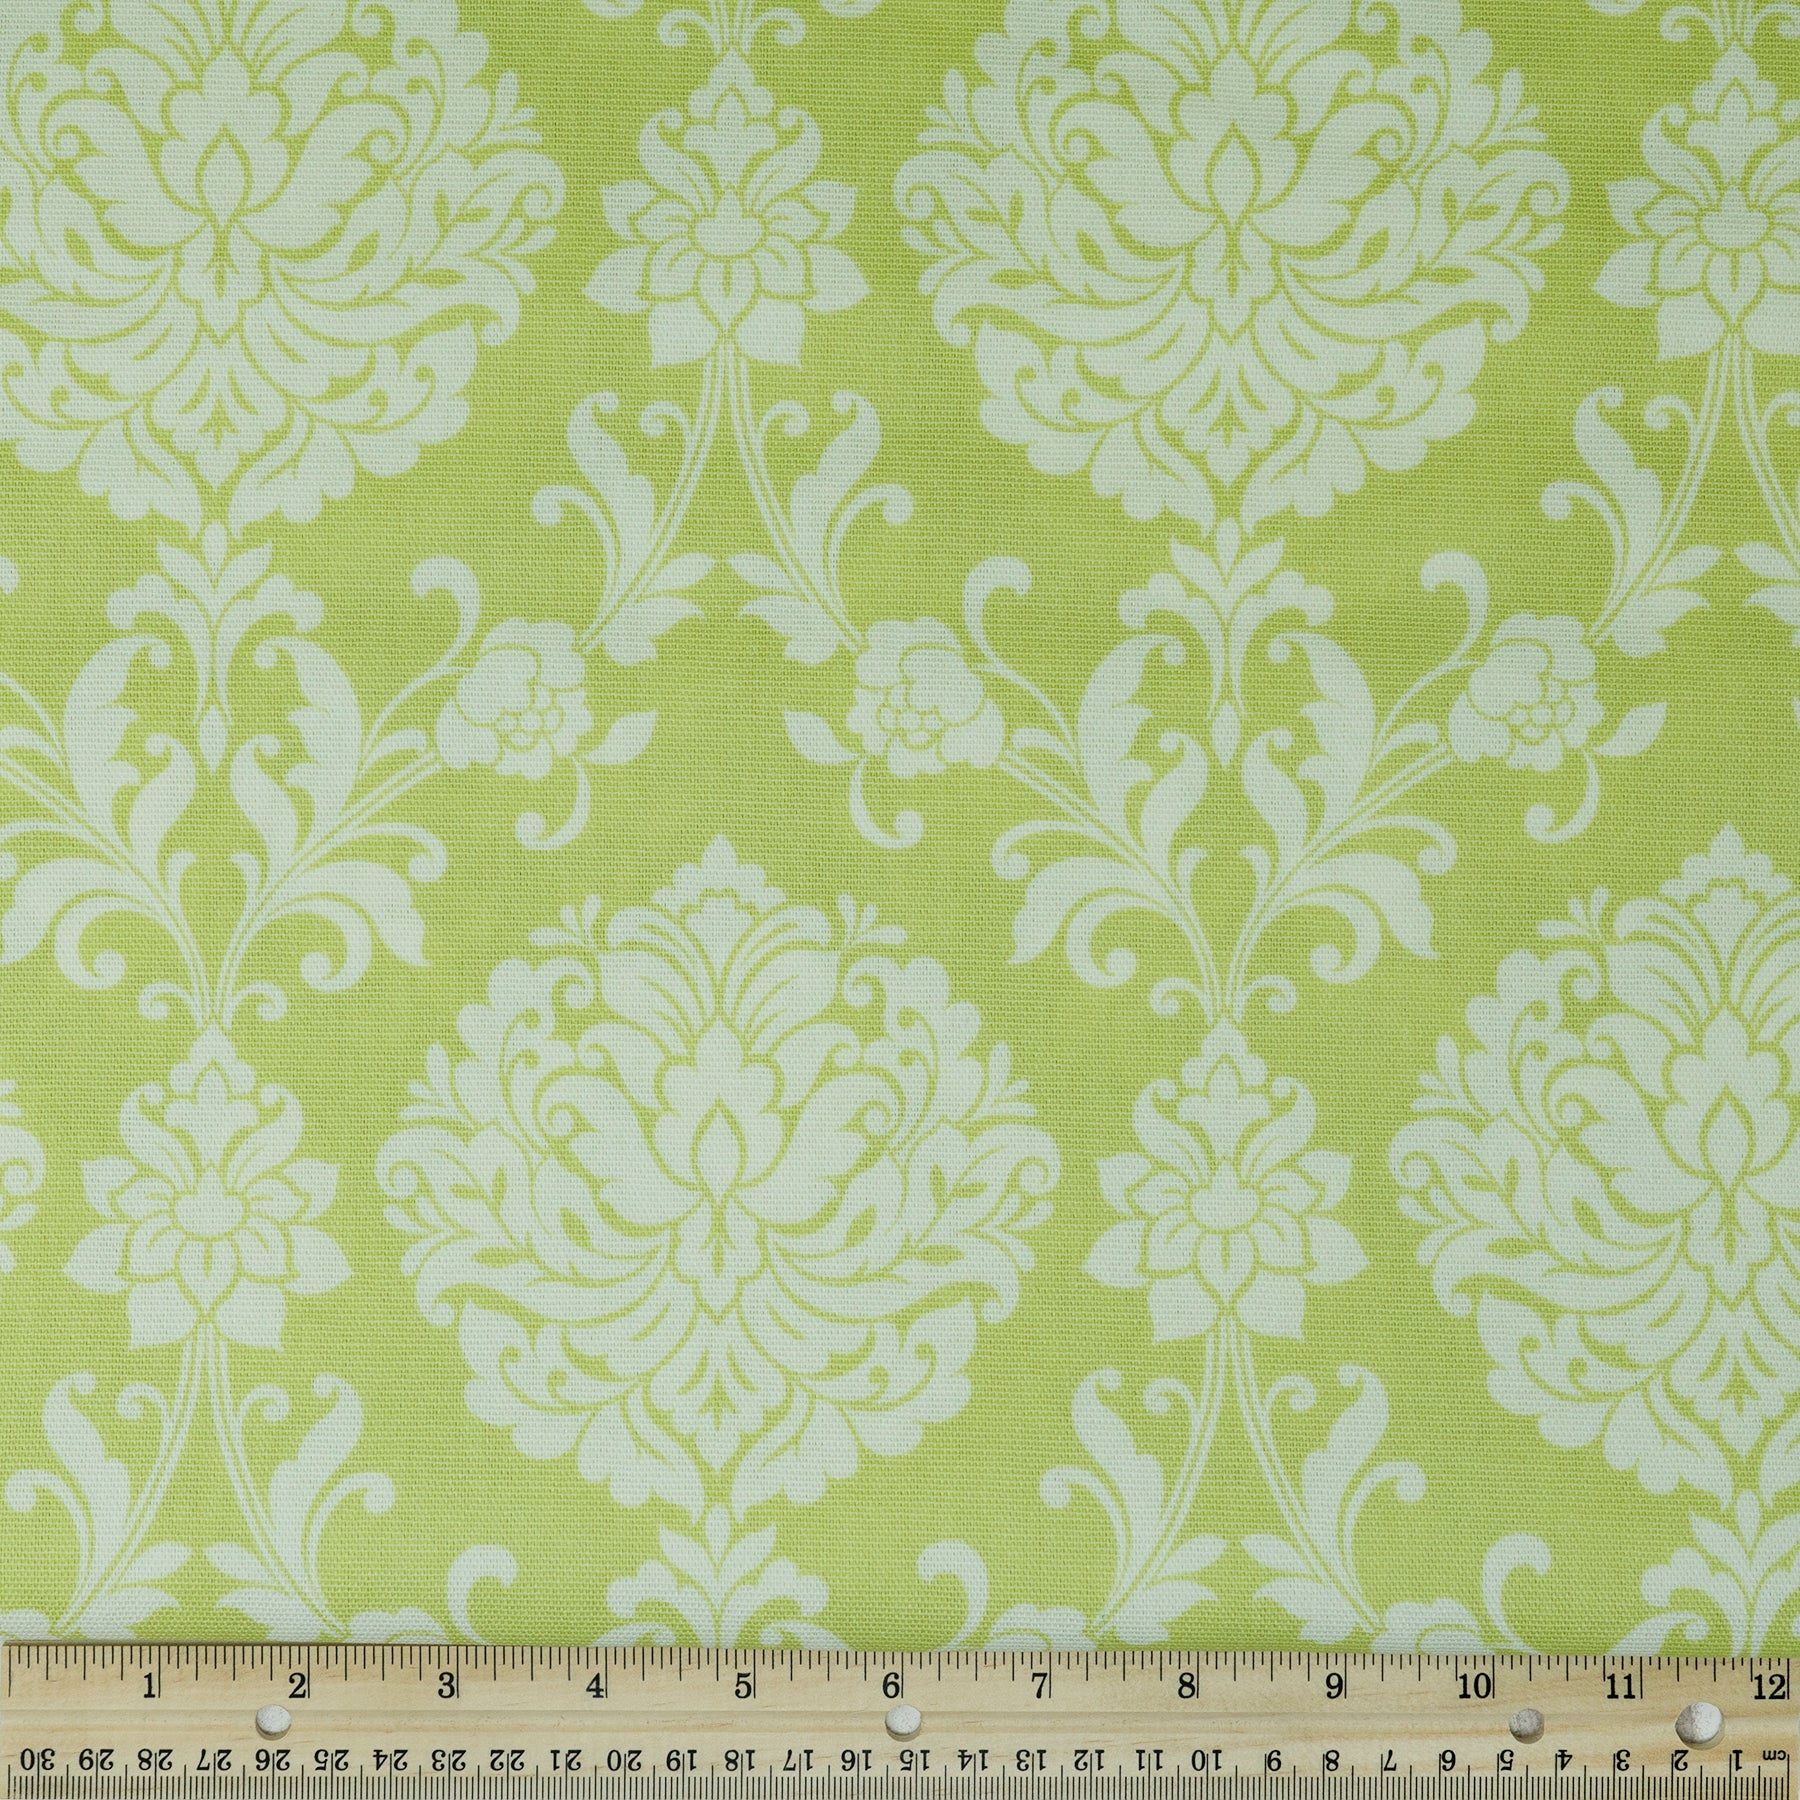 Waverly Inspirations 100% Cotton Duck 45" Width Small Damask Celery Color Sewing Fabric by the Yard